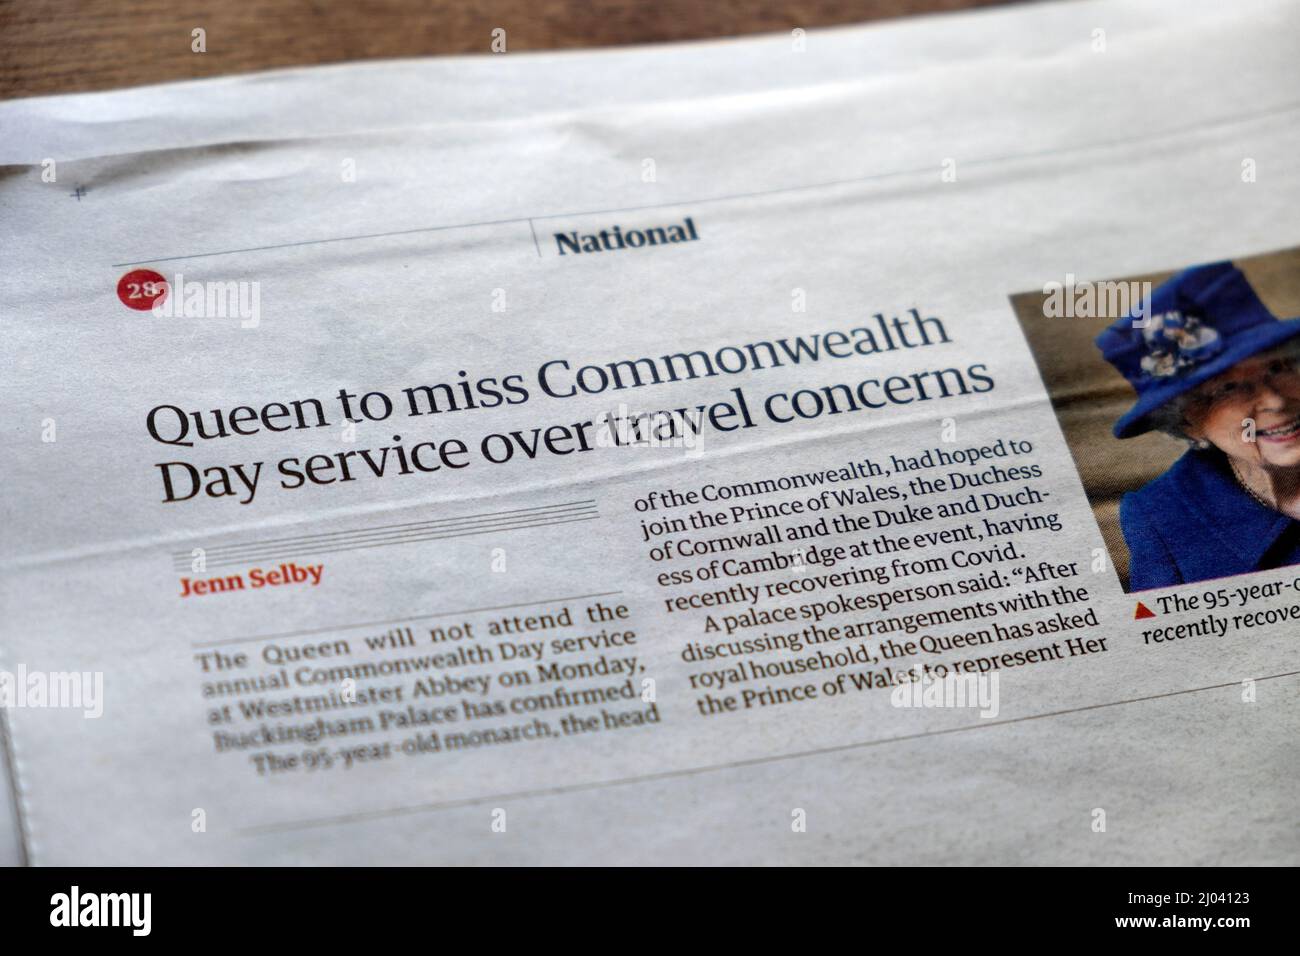 "Queen to Miss Commonwealth Day Service over Travel Concers" titolo del quotidiano Guardian Queen Elizabeth II clipping 11 marzo 2022 Londra Inghilterra Foto Stock